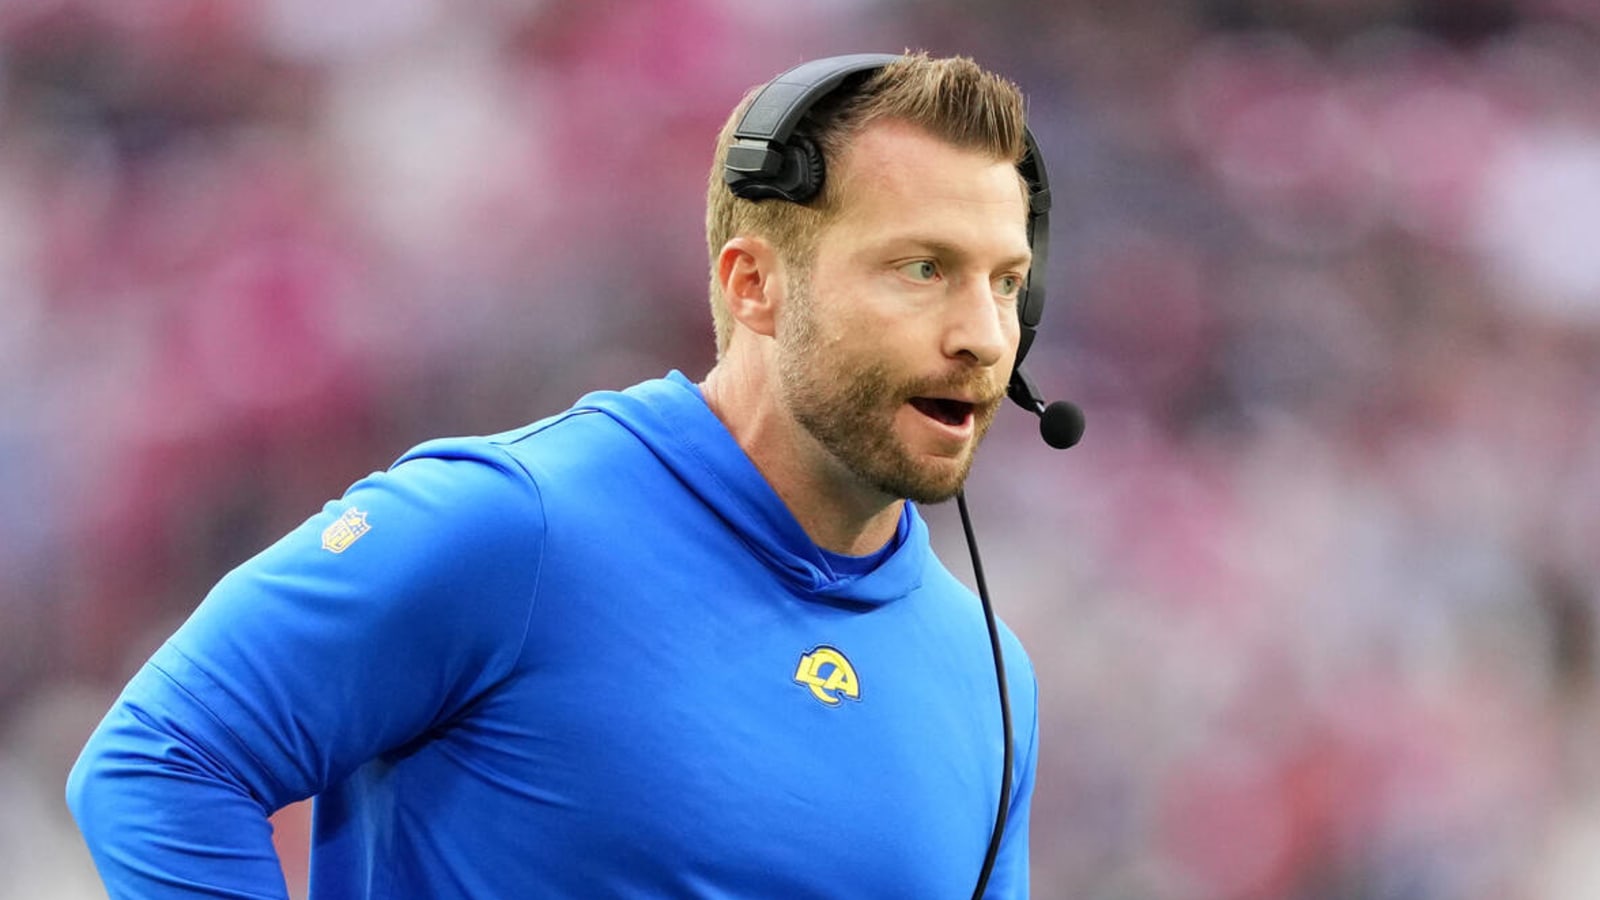 Sean McVay had incredible explanation for decision to go for it